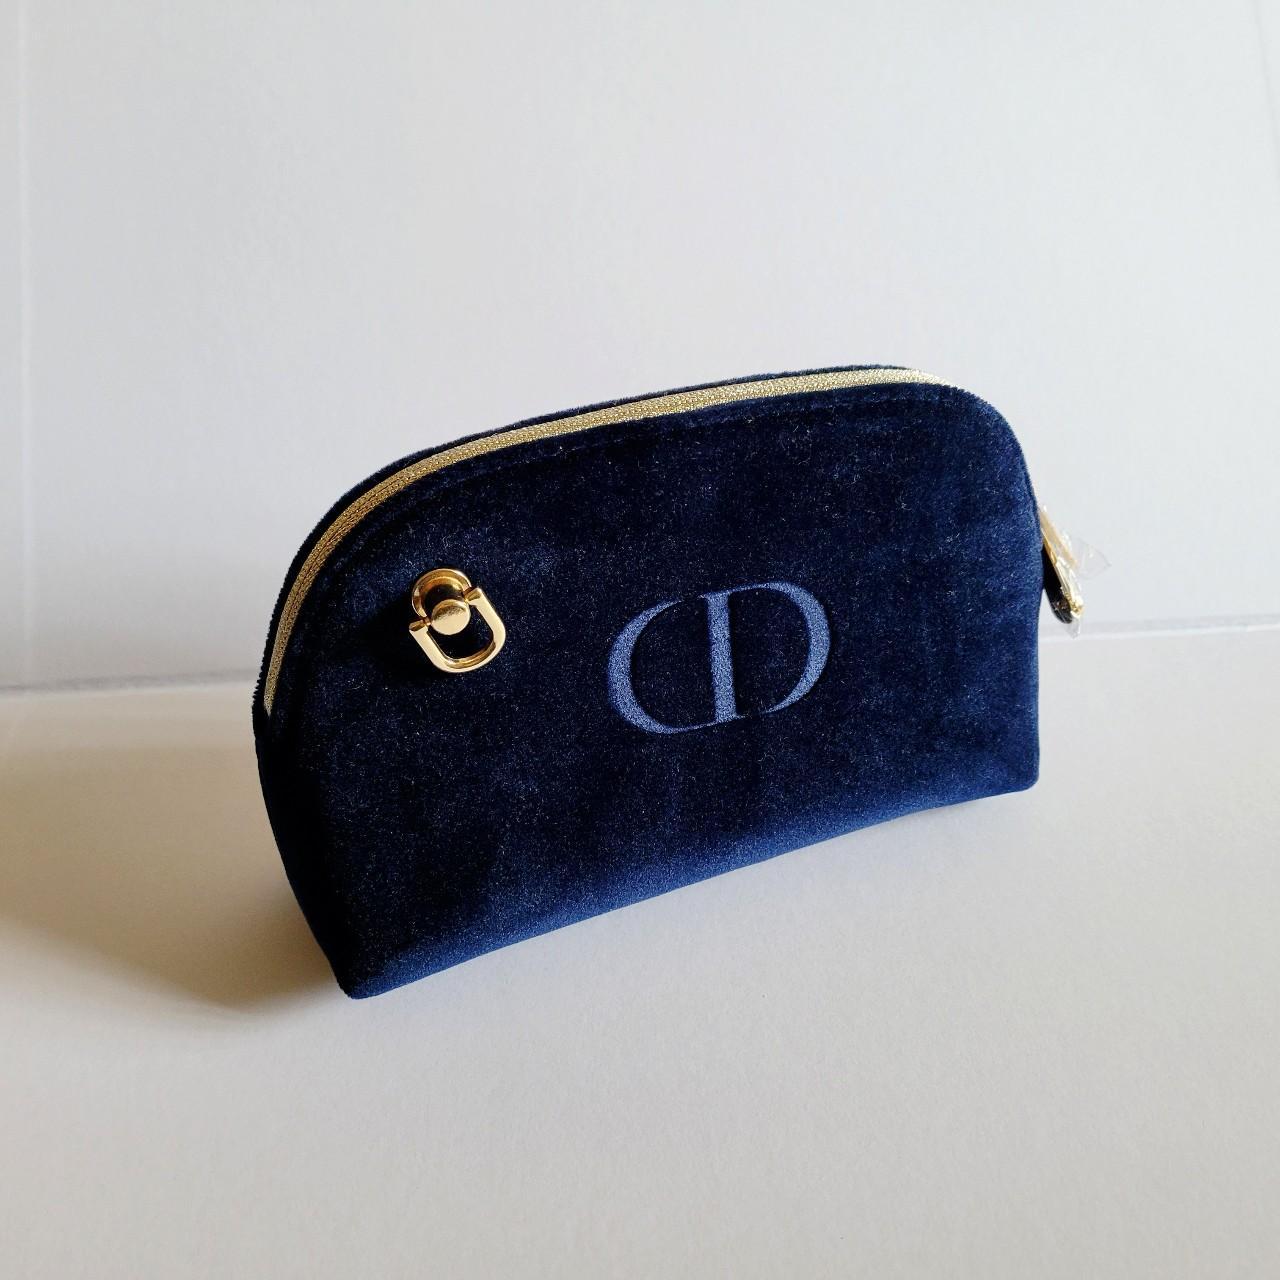 Dior Women's Navy and Gold Bag